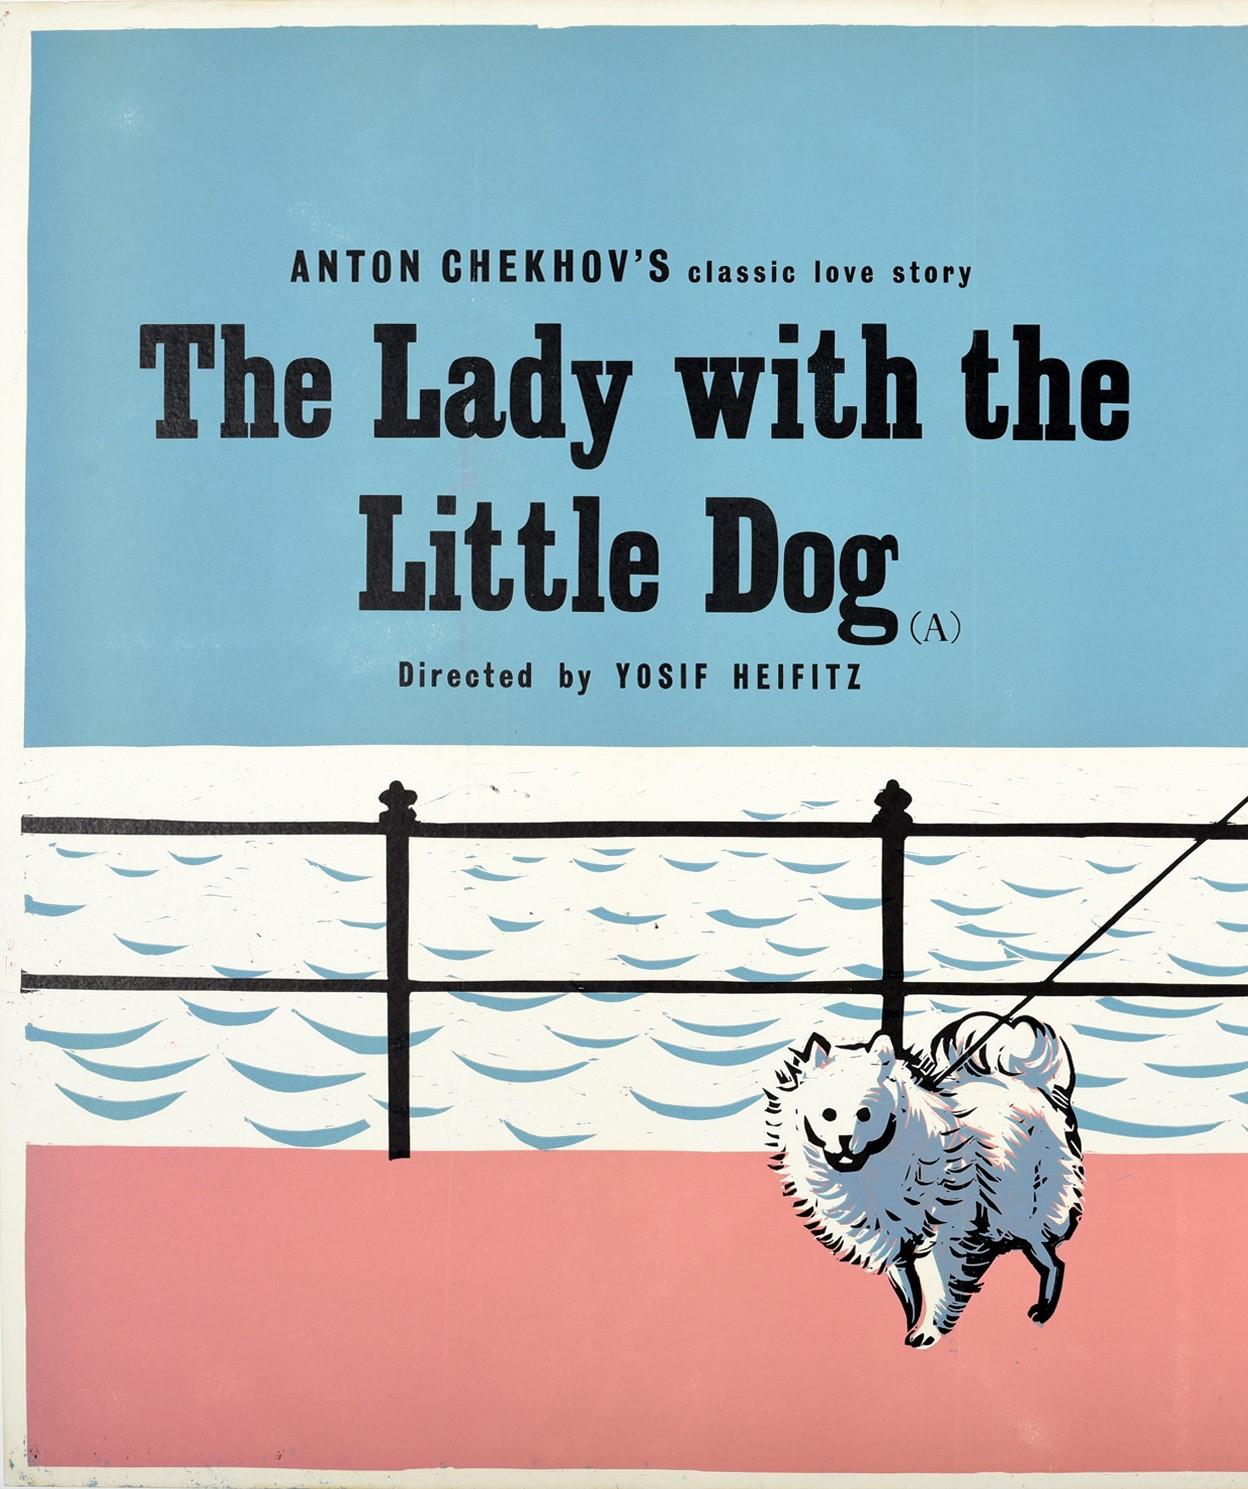 Original vintage movie poster for the UK release of the romantic drama film directed by Iosif Kheifits - ???? ? ???????? / The Lady with the Dog - inspired by the Classic love story by the renowned Russian writer Anton Chekov about an adulterous